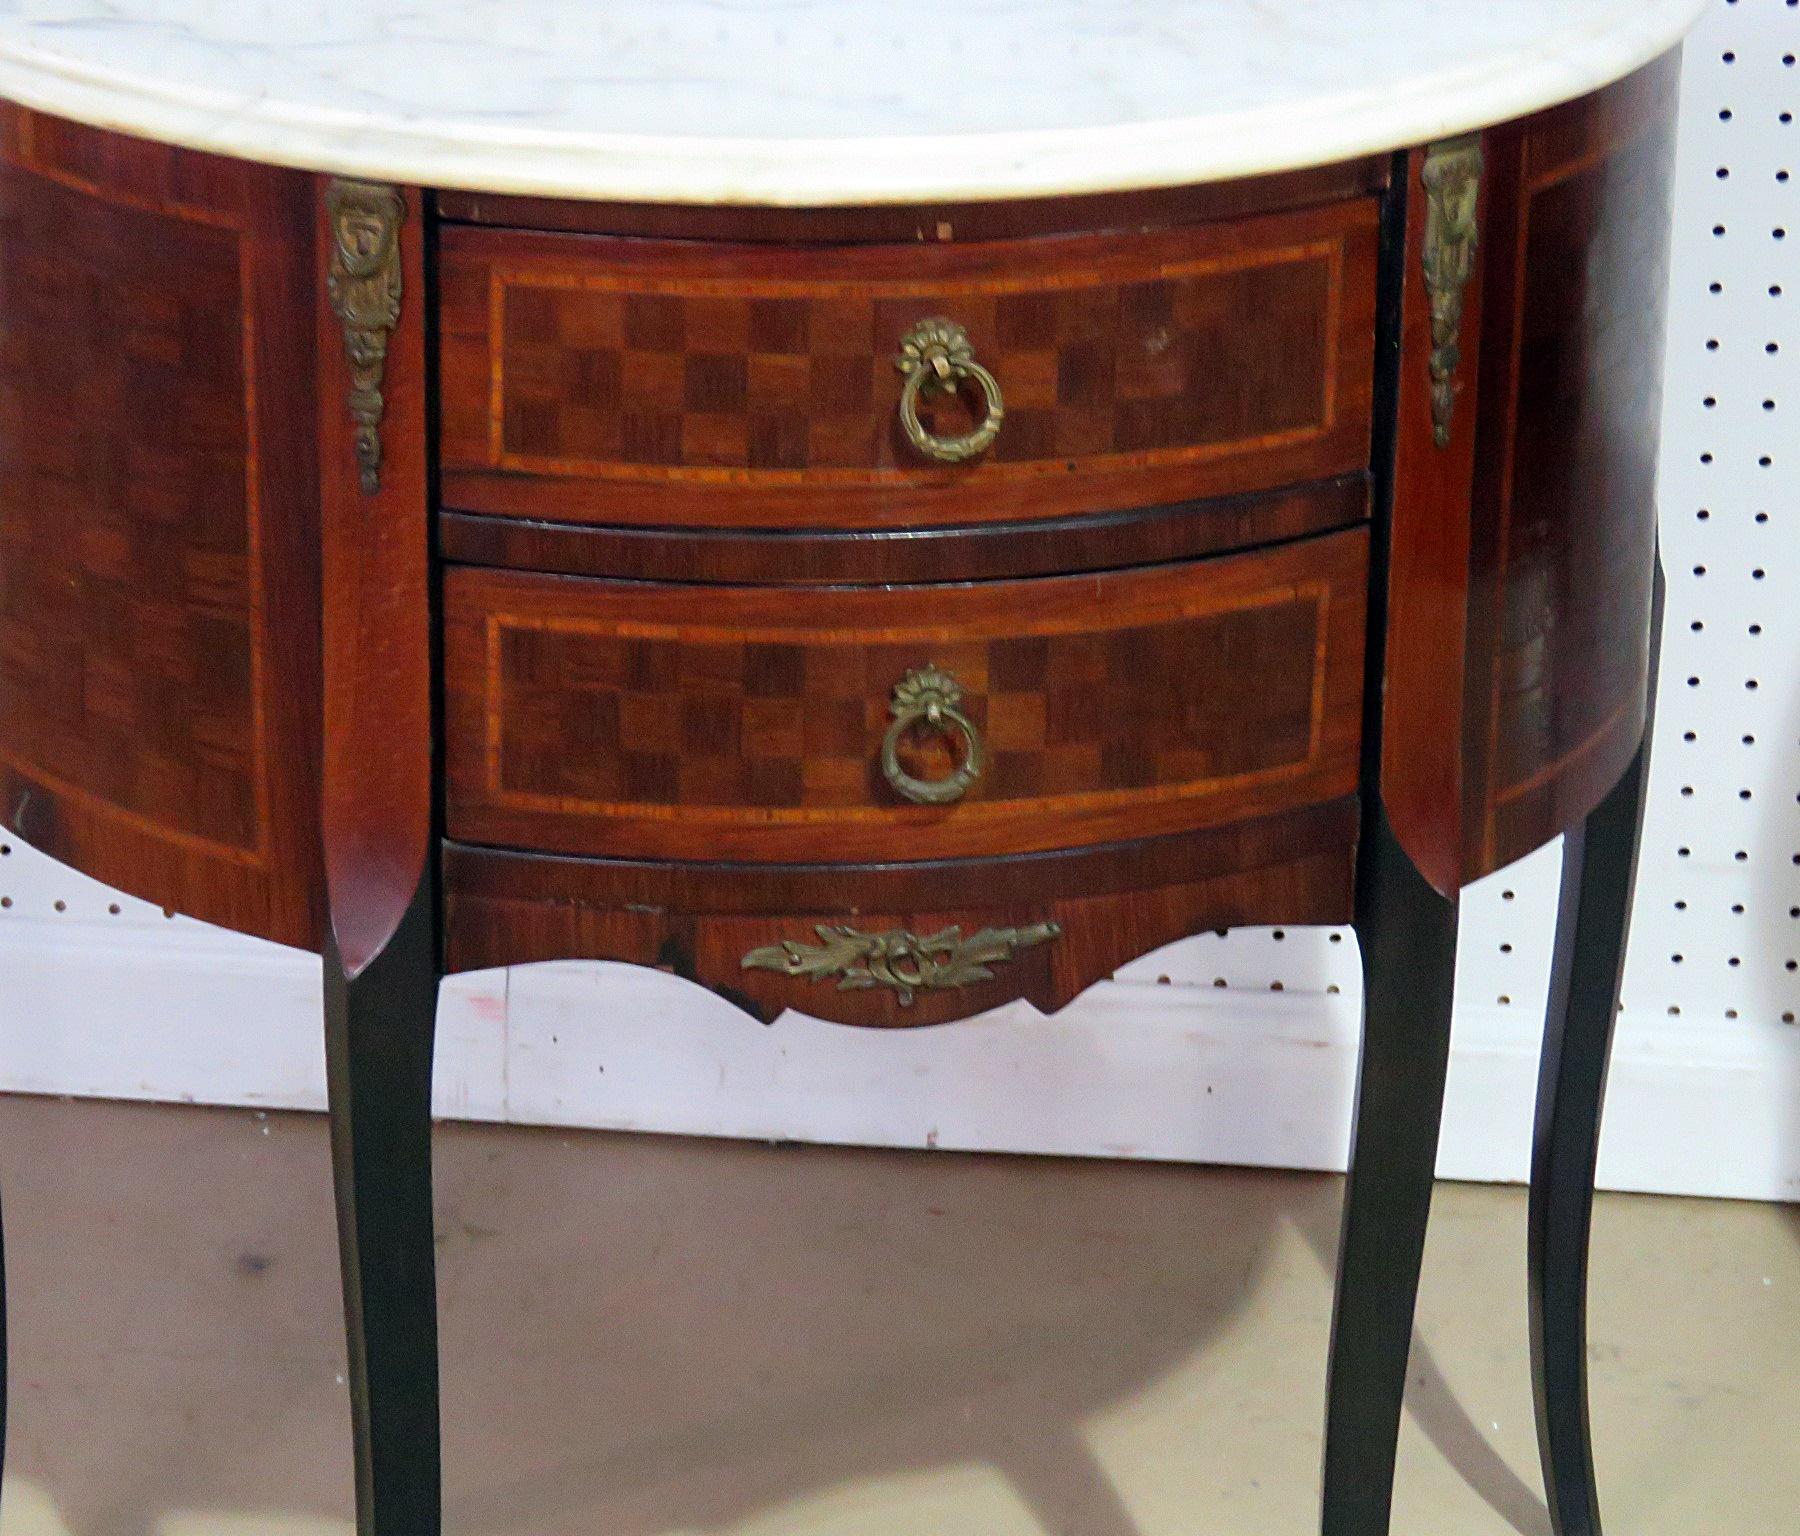 Pair of Louis XV style inlaid marble-top end tables with two drawers.